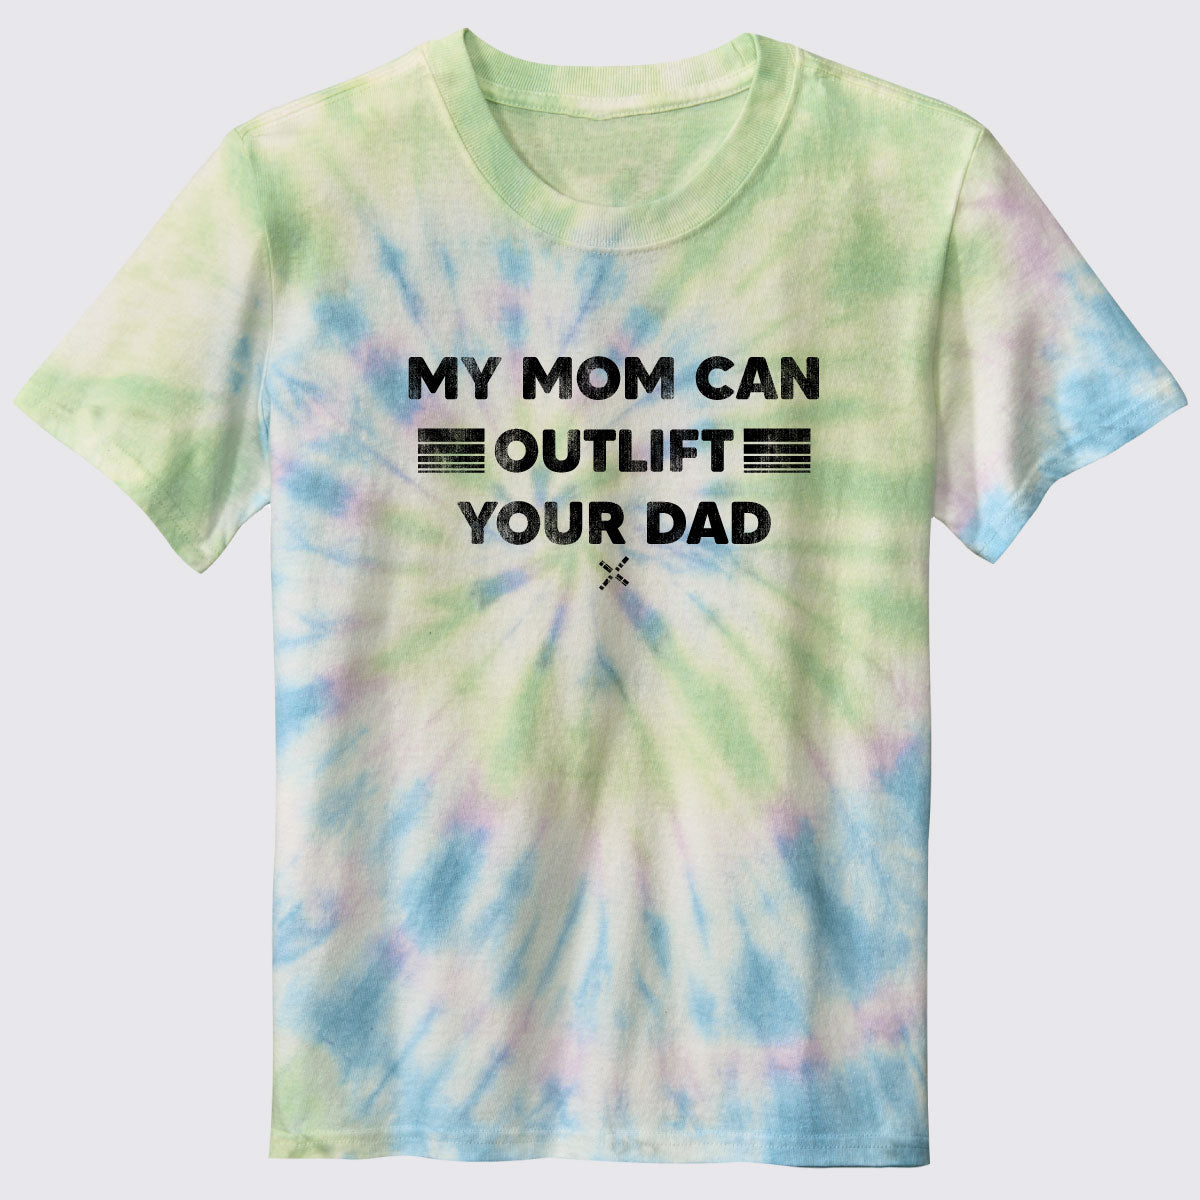 My Mom Can Outlift Your Dad Youth Spiral Tie-Dye Tee